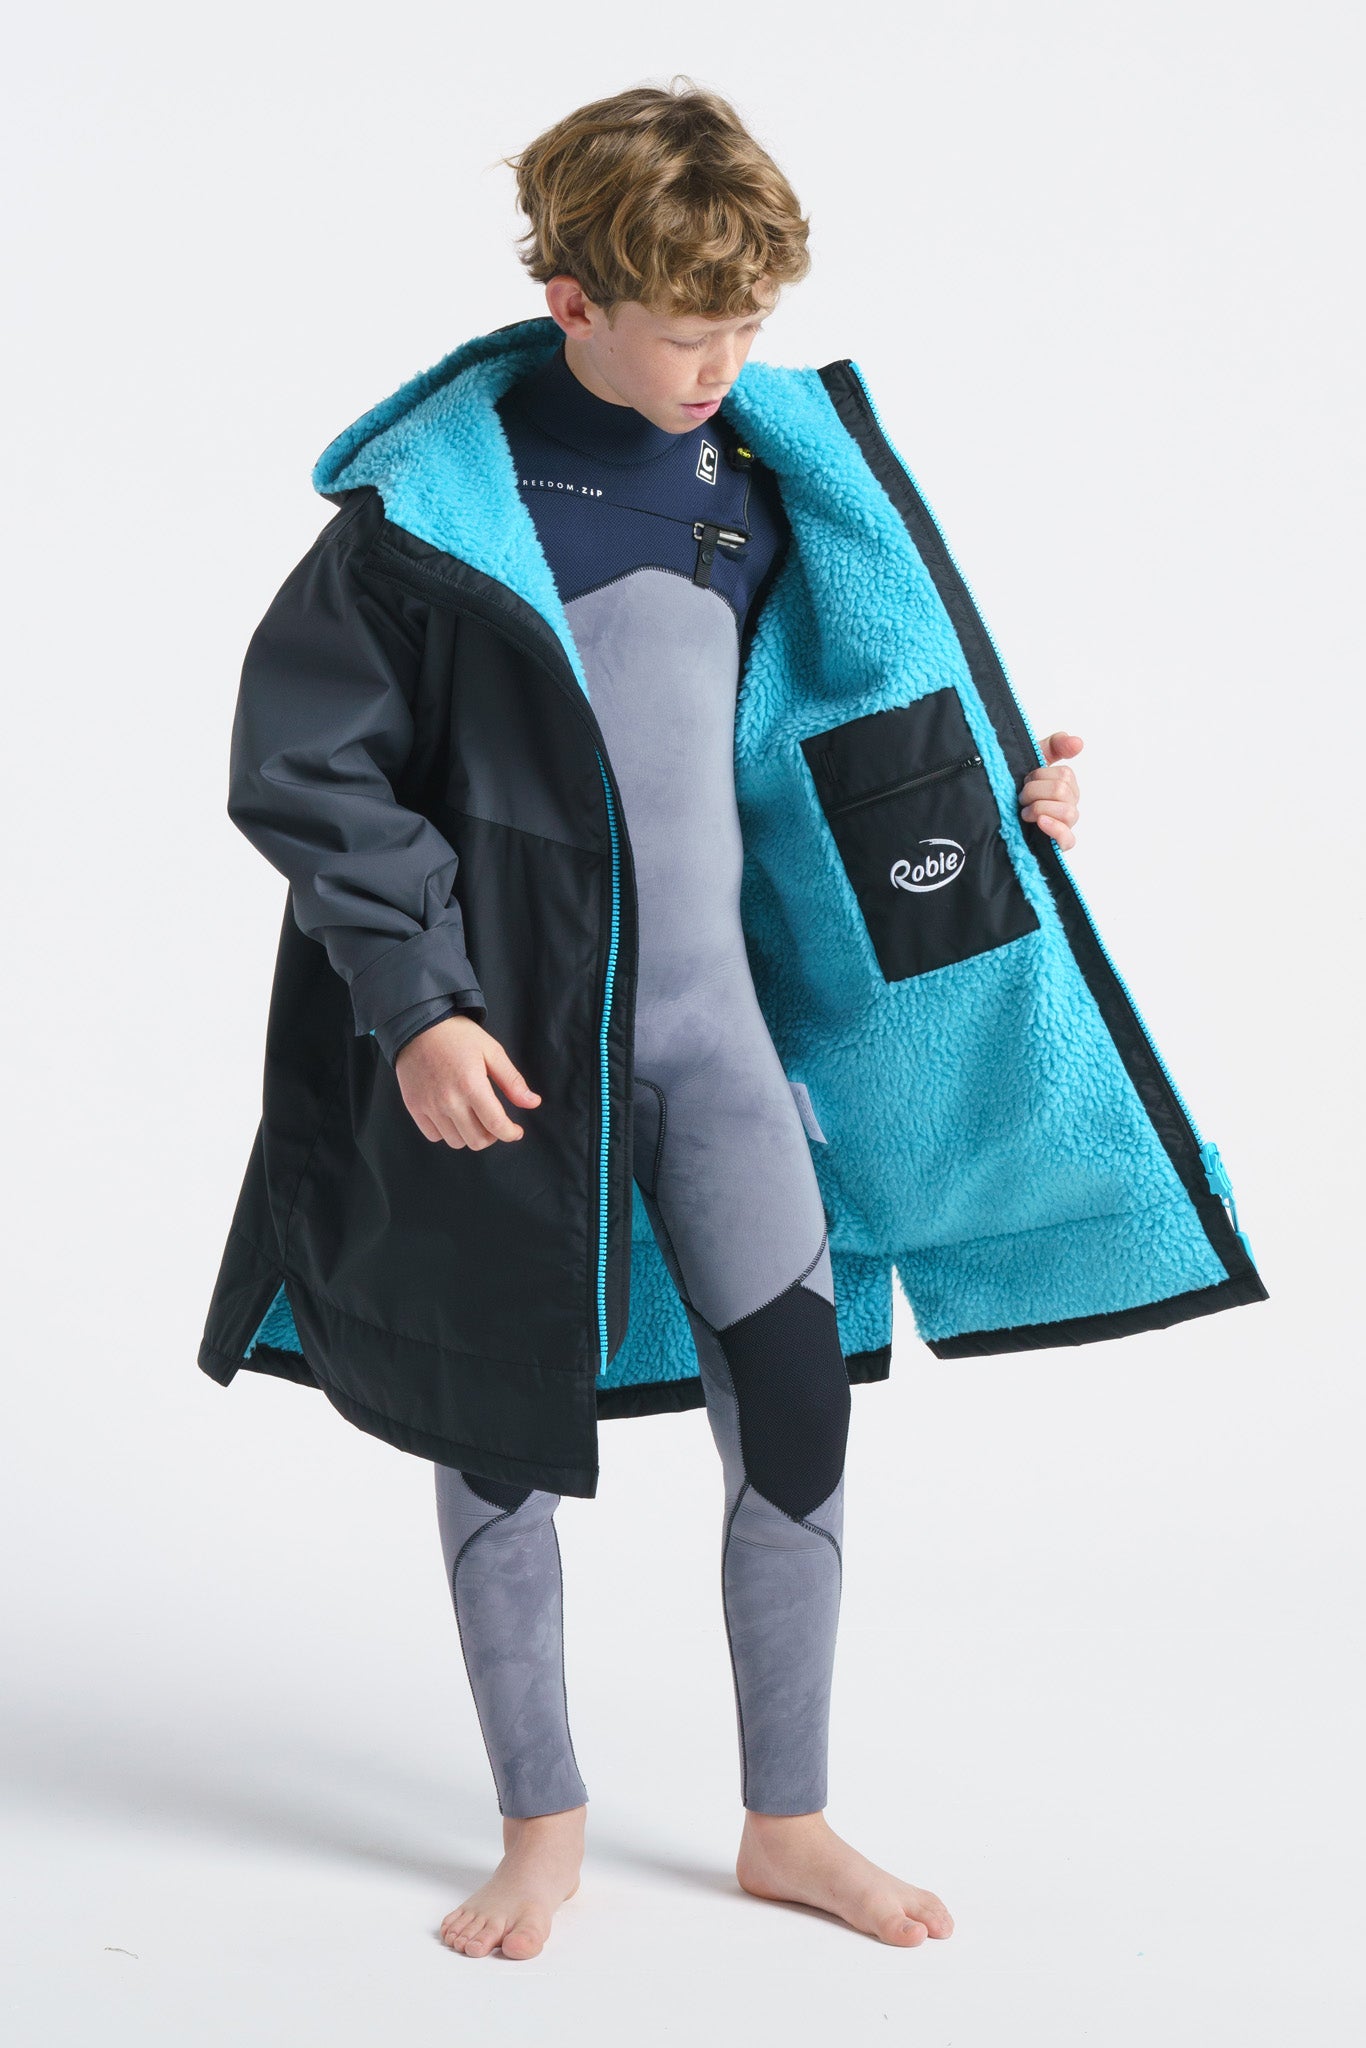 robie-robes-dry-series-changing-robe-waterproof-preorder-product-blacksheepsurfco-galway-ireland-charcoal-blue-atoll-junior-inside